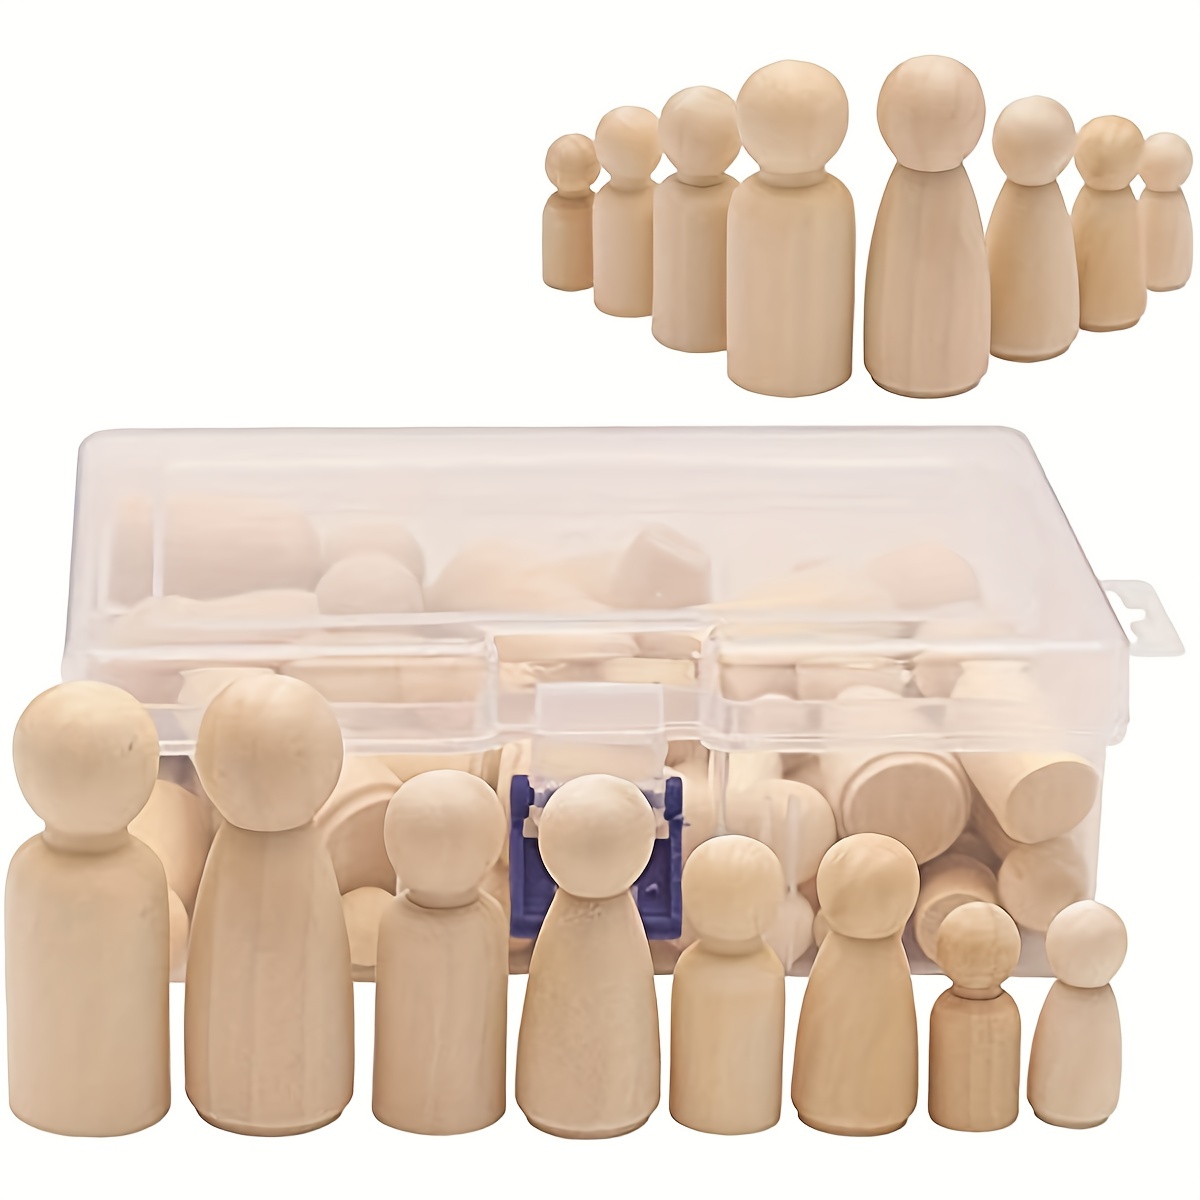 Toddmomy 40pcs Unfinished Wooden Peg Dolls, Wooden Peg People Doll Bodies  Natural Decorative Peg Doll People Figures for Painting, Craft Art  Projects